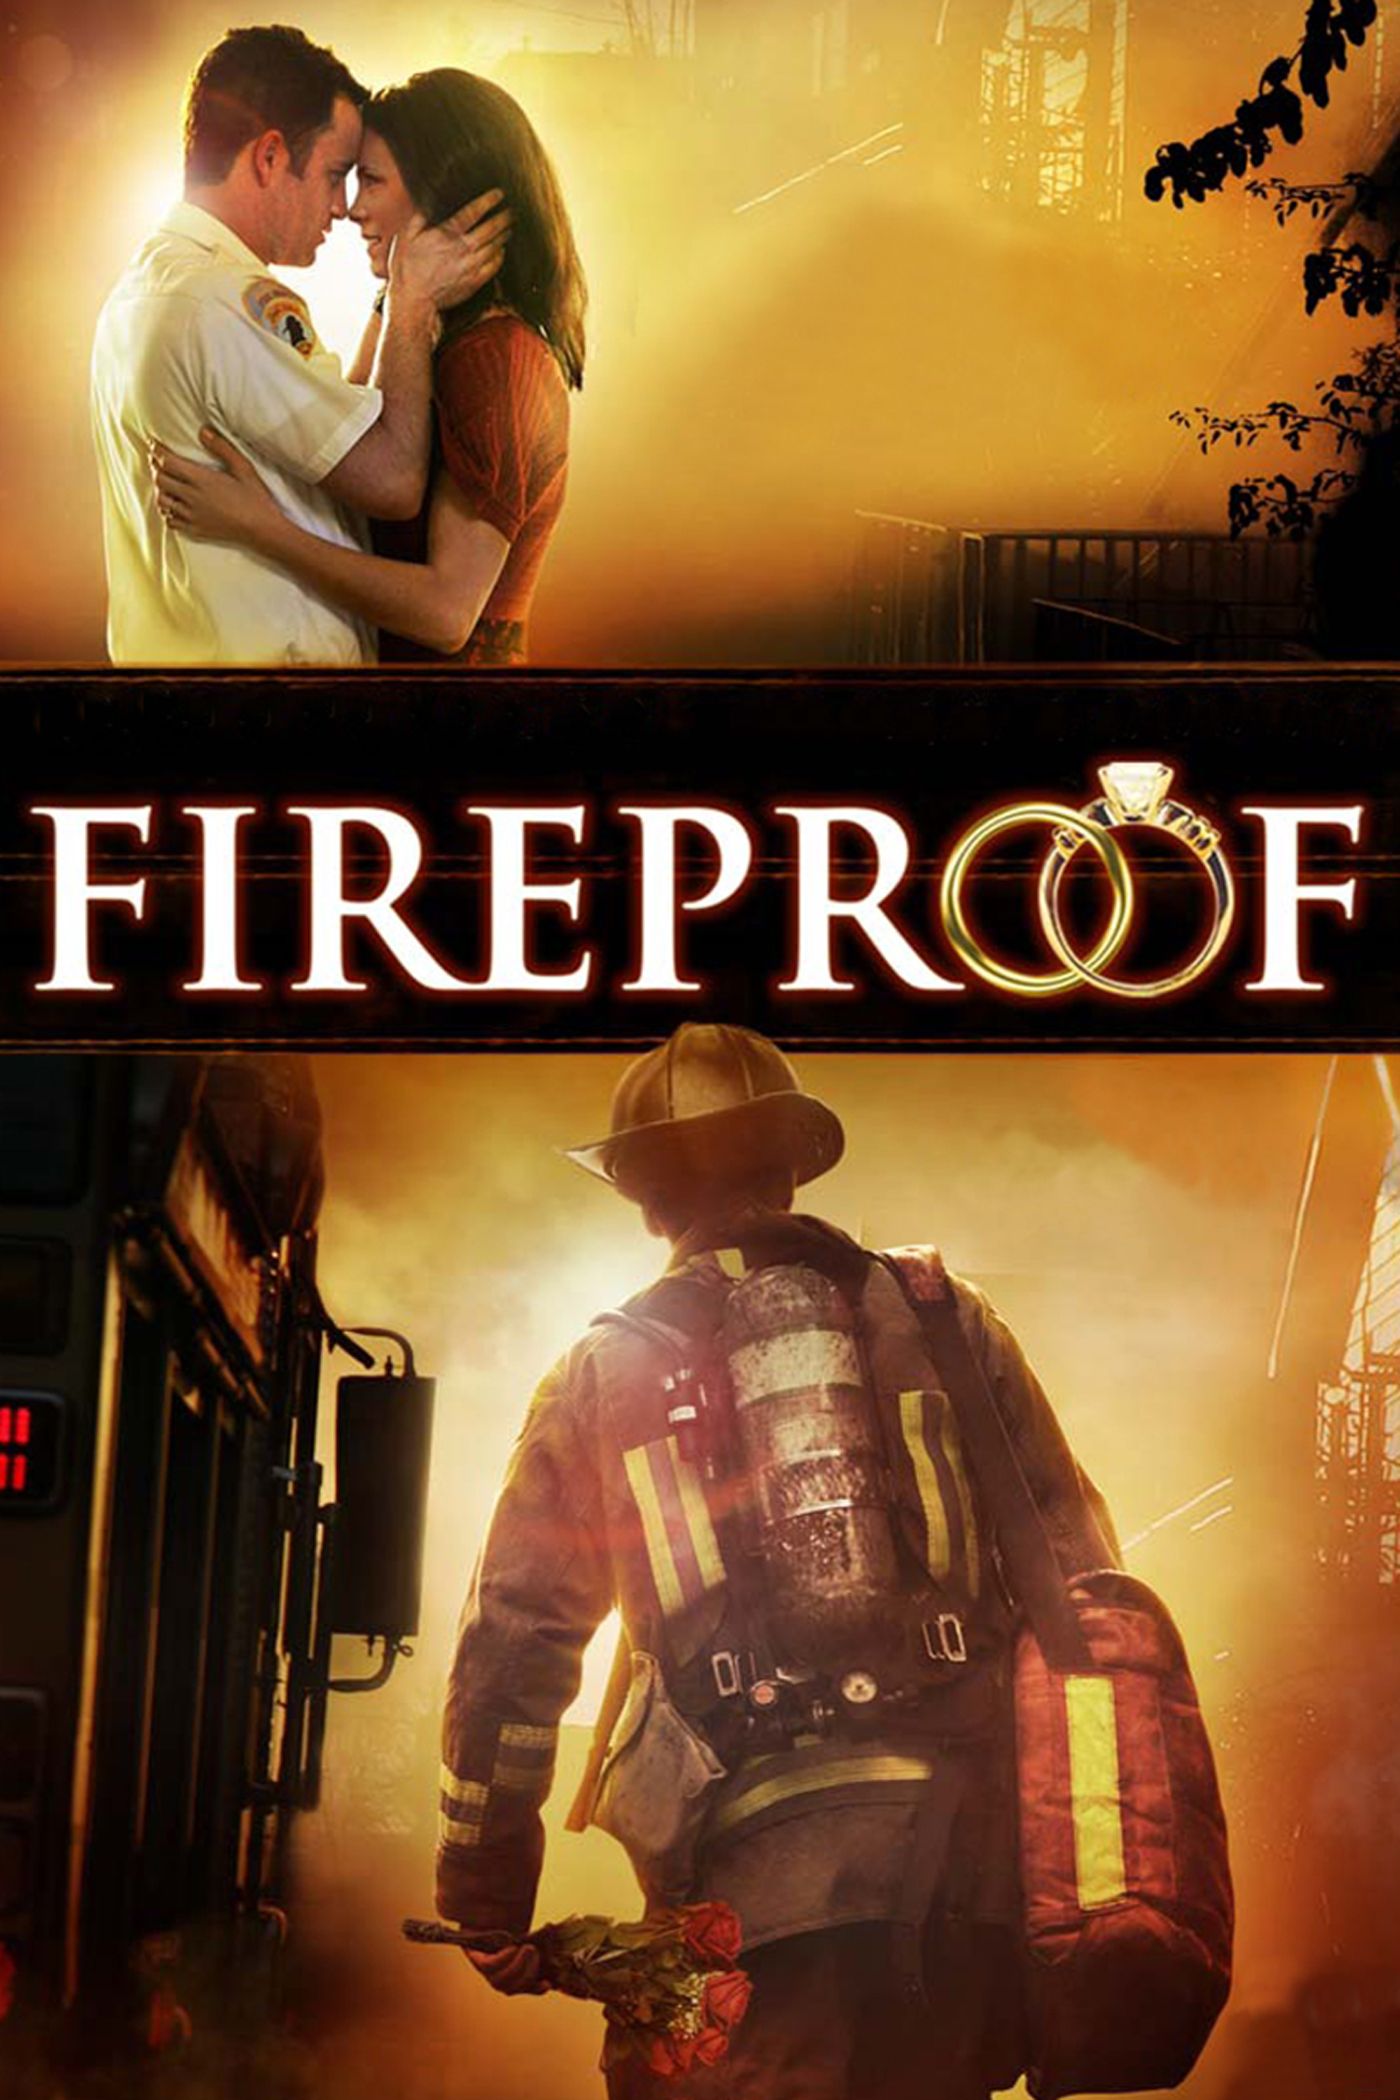 director of fireproof the movie